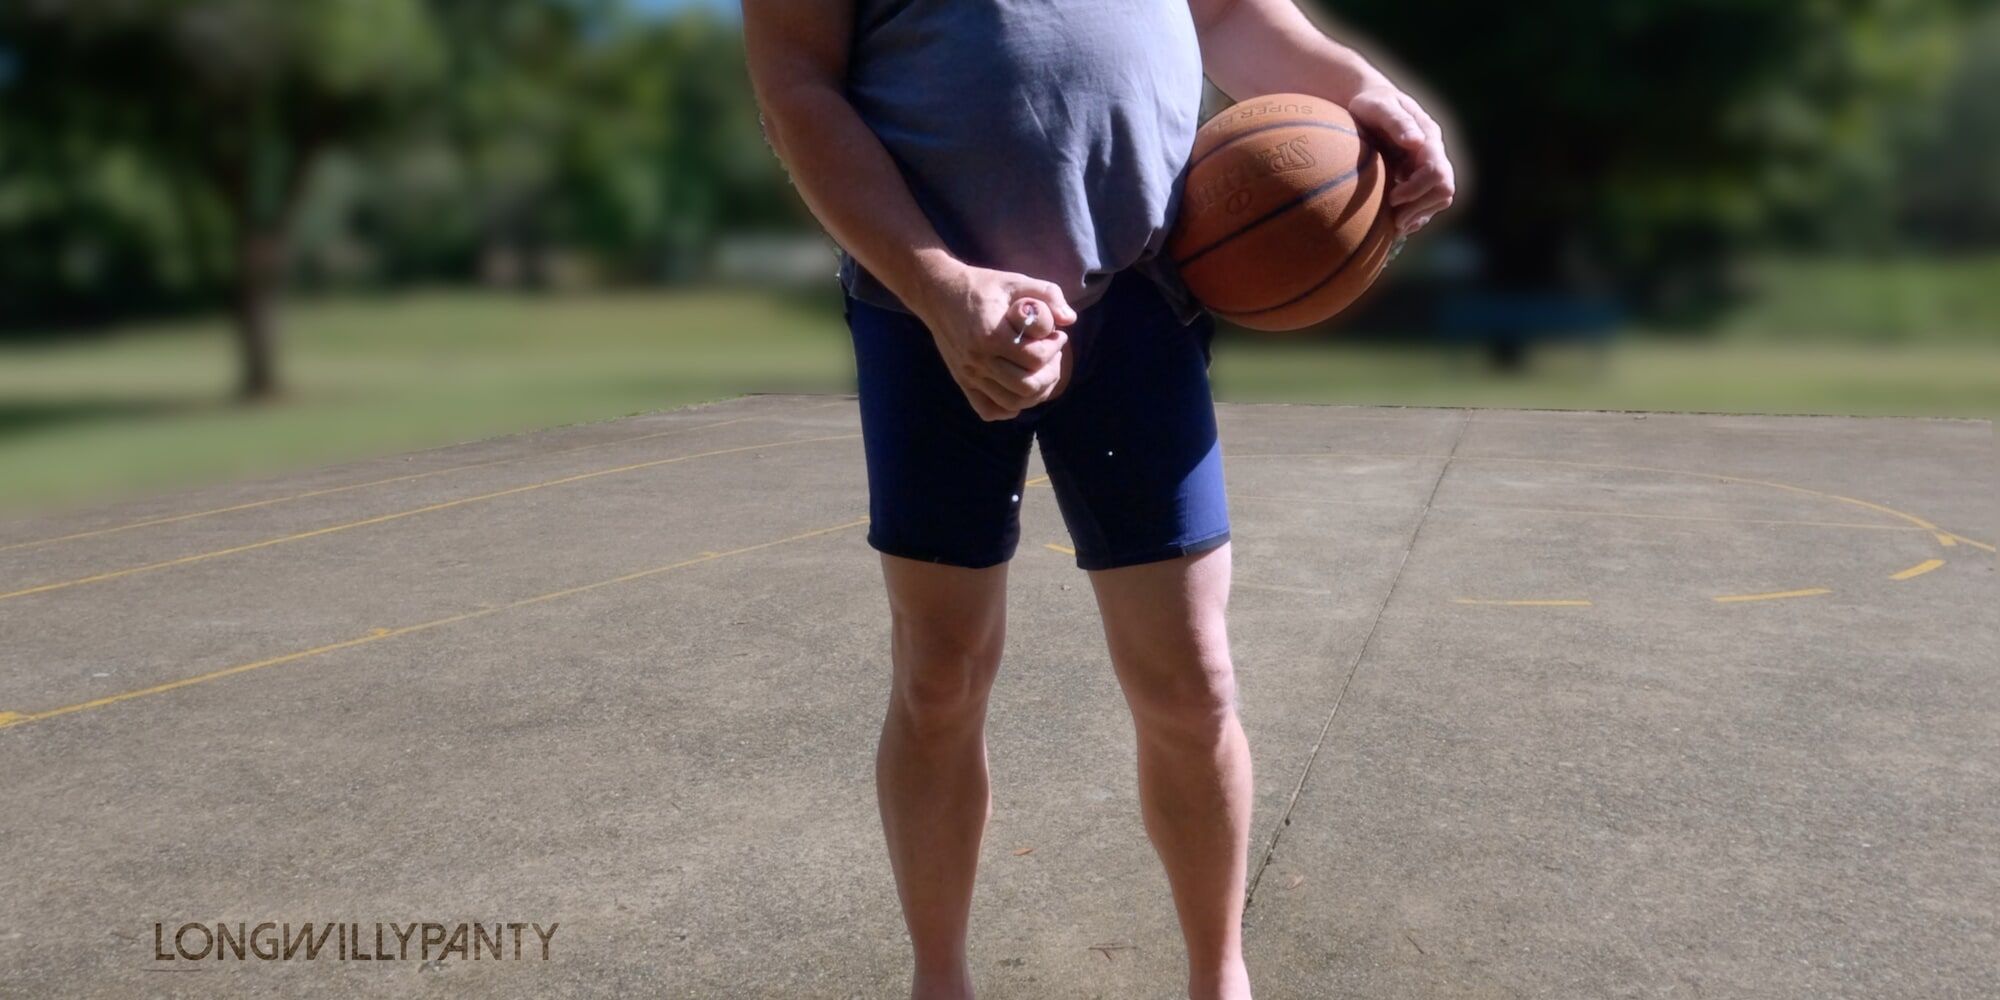 Amateur exhibitionist plays dick out basketball #16